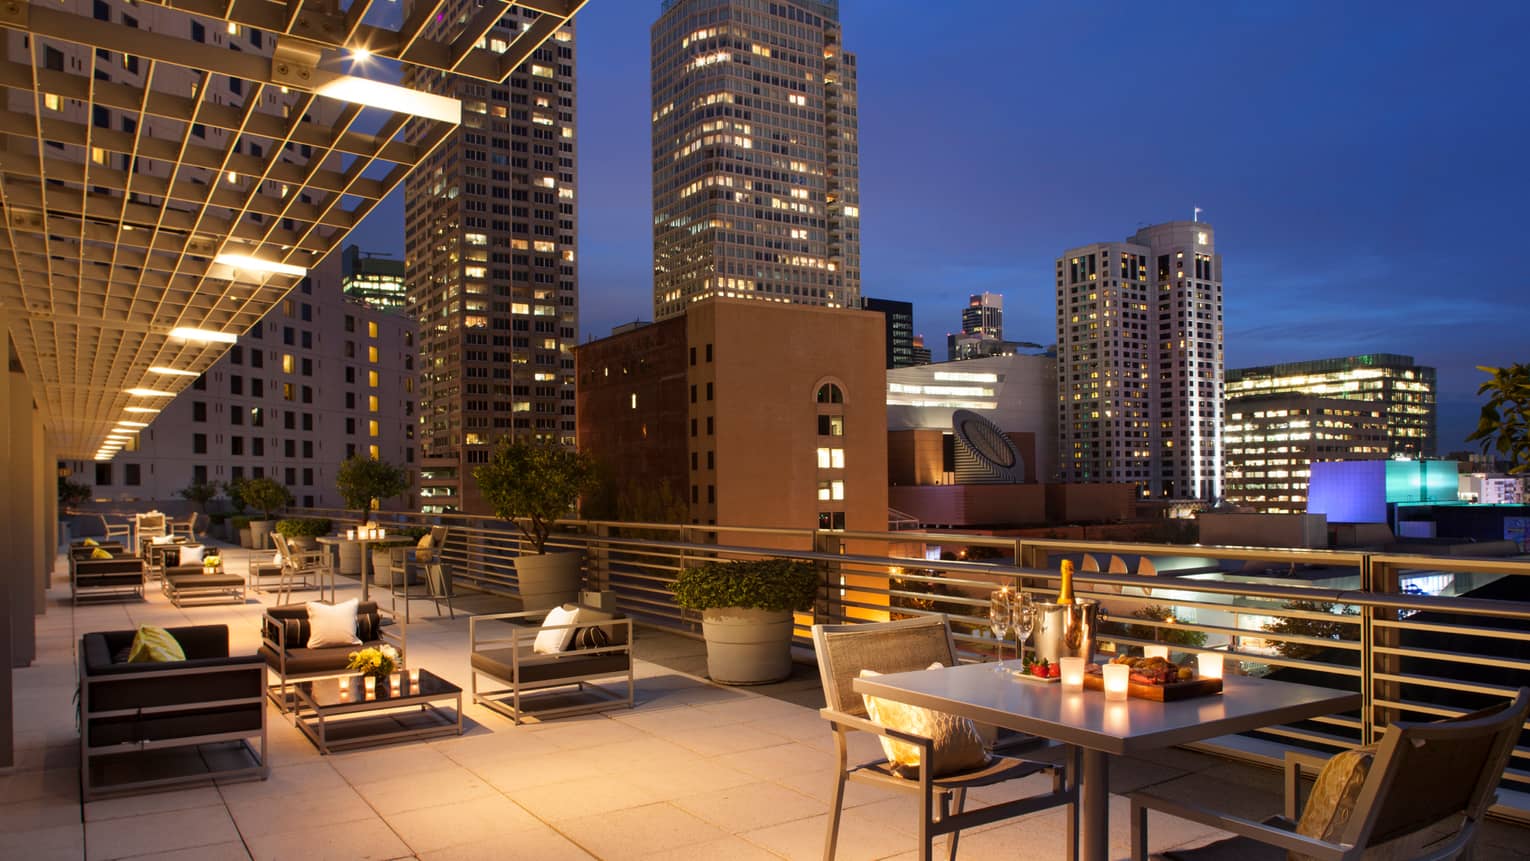 Large rooftop patio at night with candle-lit tables, champagne on ice, black cushioned chairs, city lights